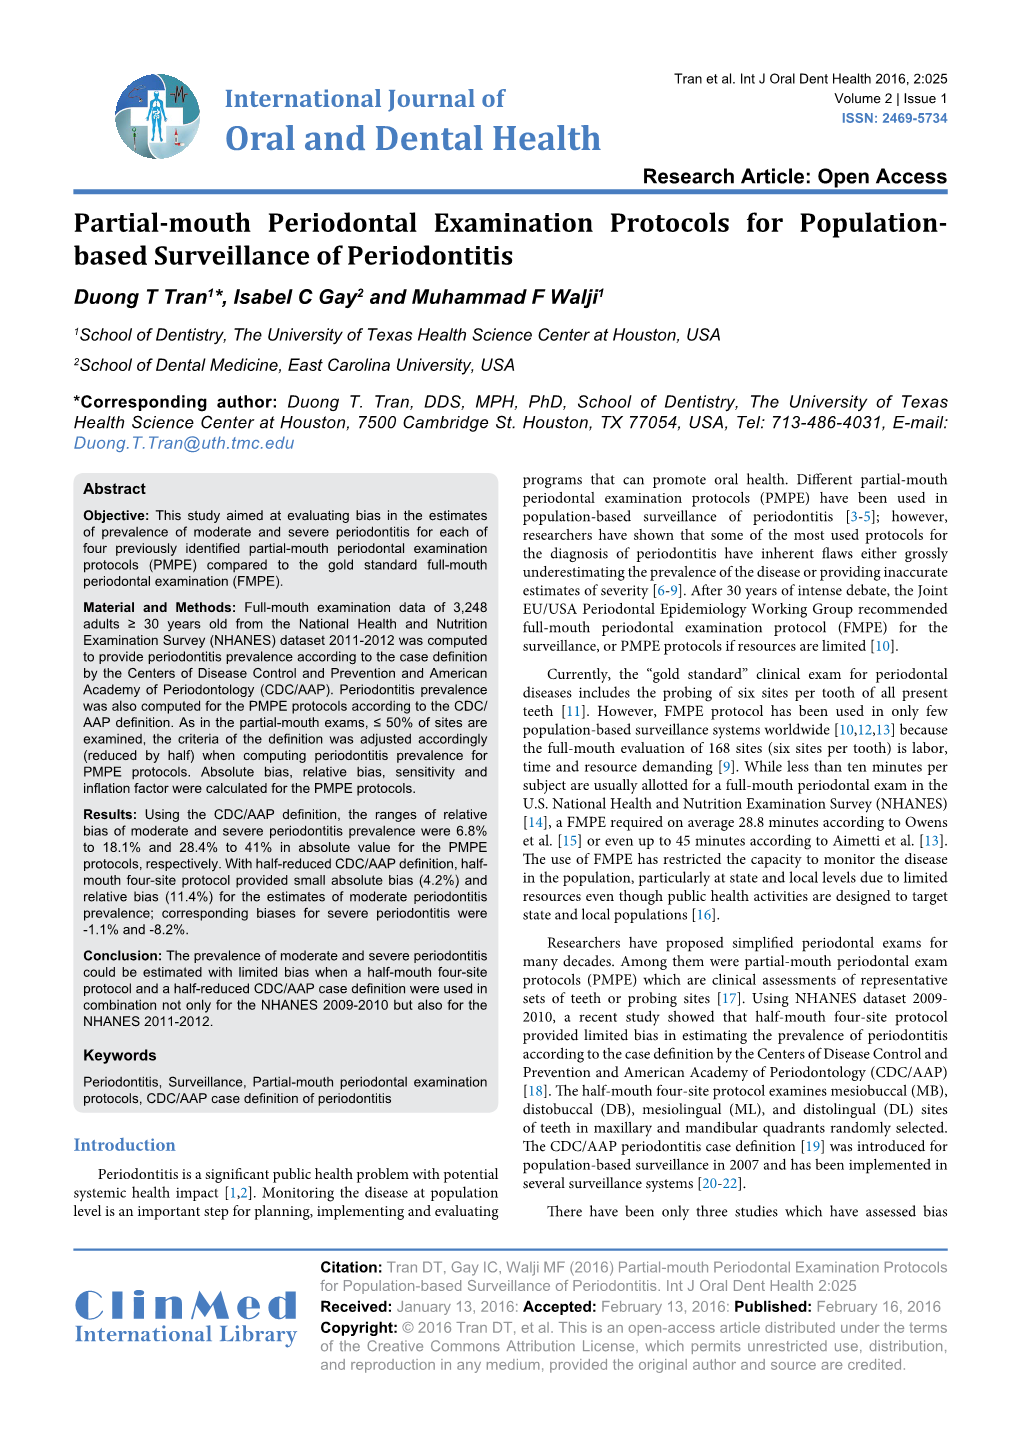 Partial-Mouth Periodontal Examination Protocols for Population- Based Surveillance of Periodontitis Duong T Tran1*, Isabel C Gay2 and Muhammad F Walji1